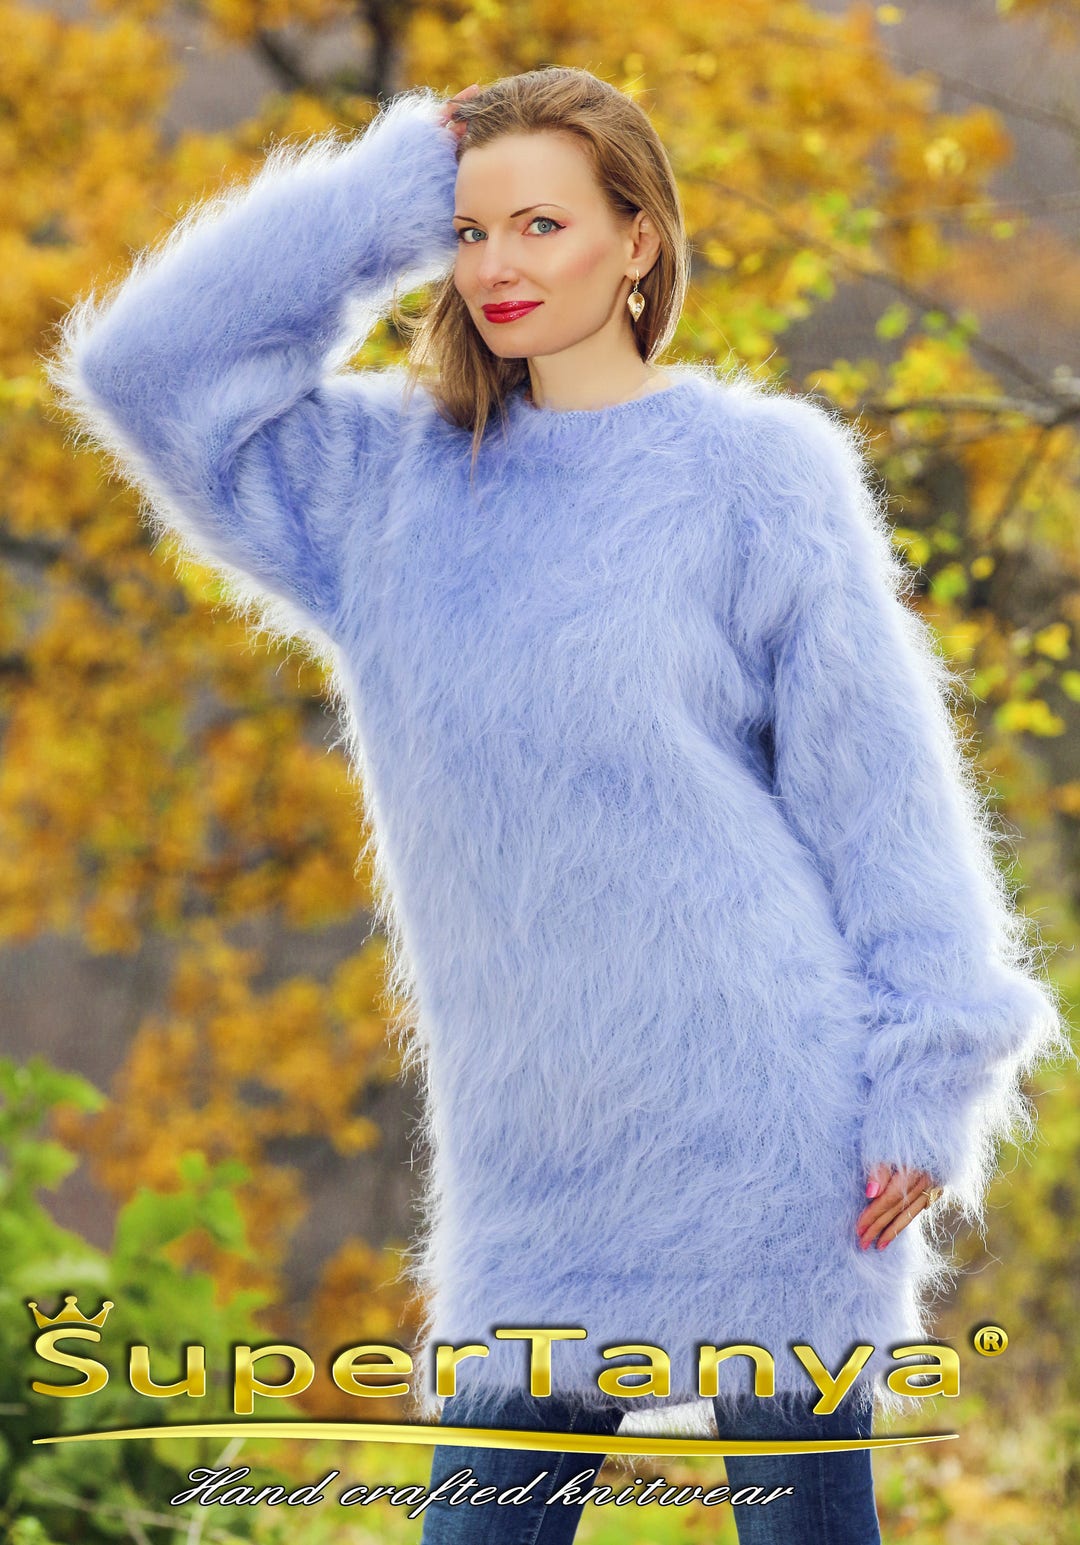 Fuzzy Blue Long Mohair Light Sweater Dress by SUPERTANYA - Etsy